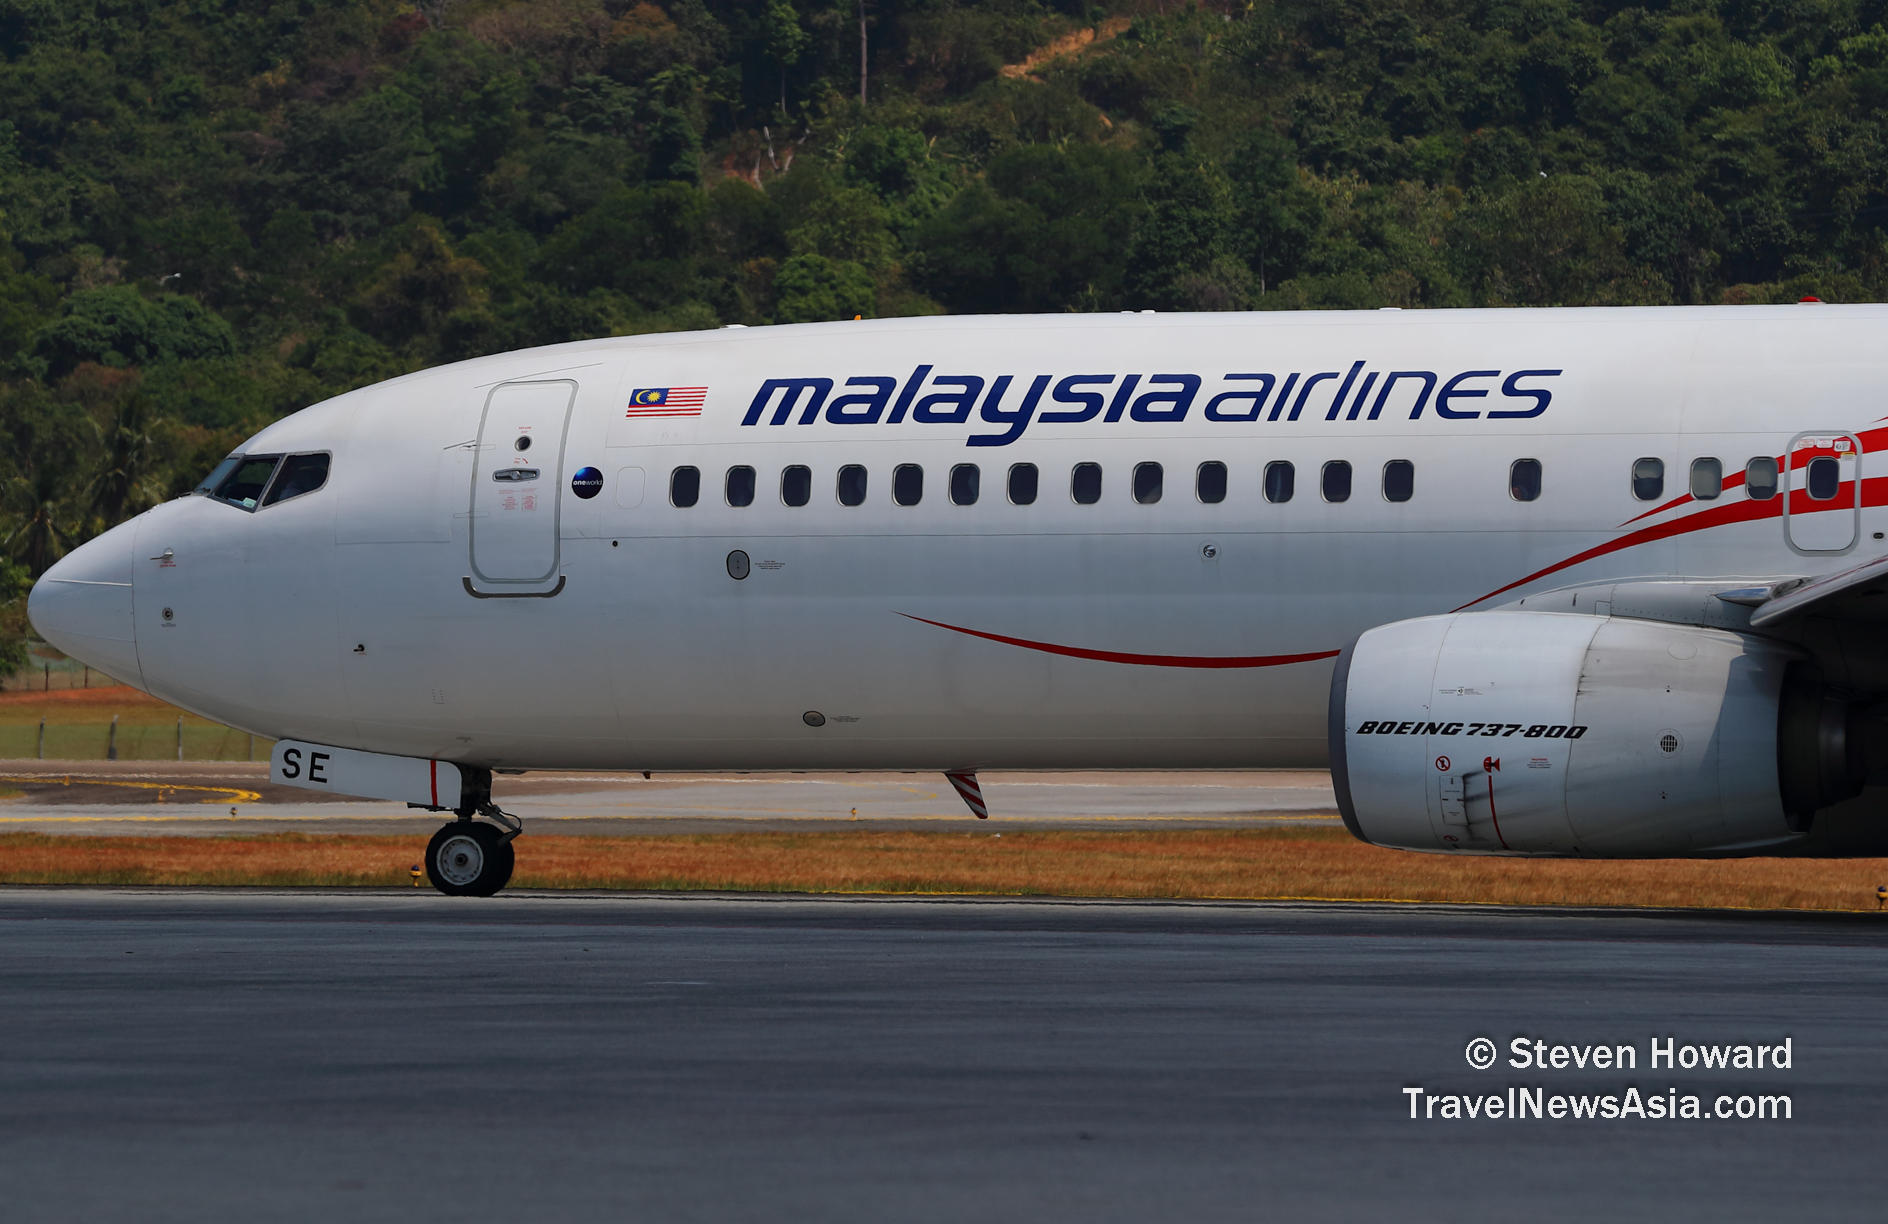 Malaysia Airlines Boeing 737-800 reg: 9M-MSE. Picture by Steven Howard of TravelNewsAsia.com Click to enlarge.